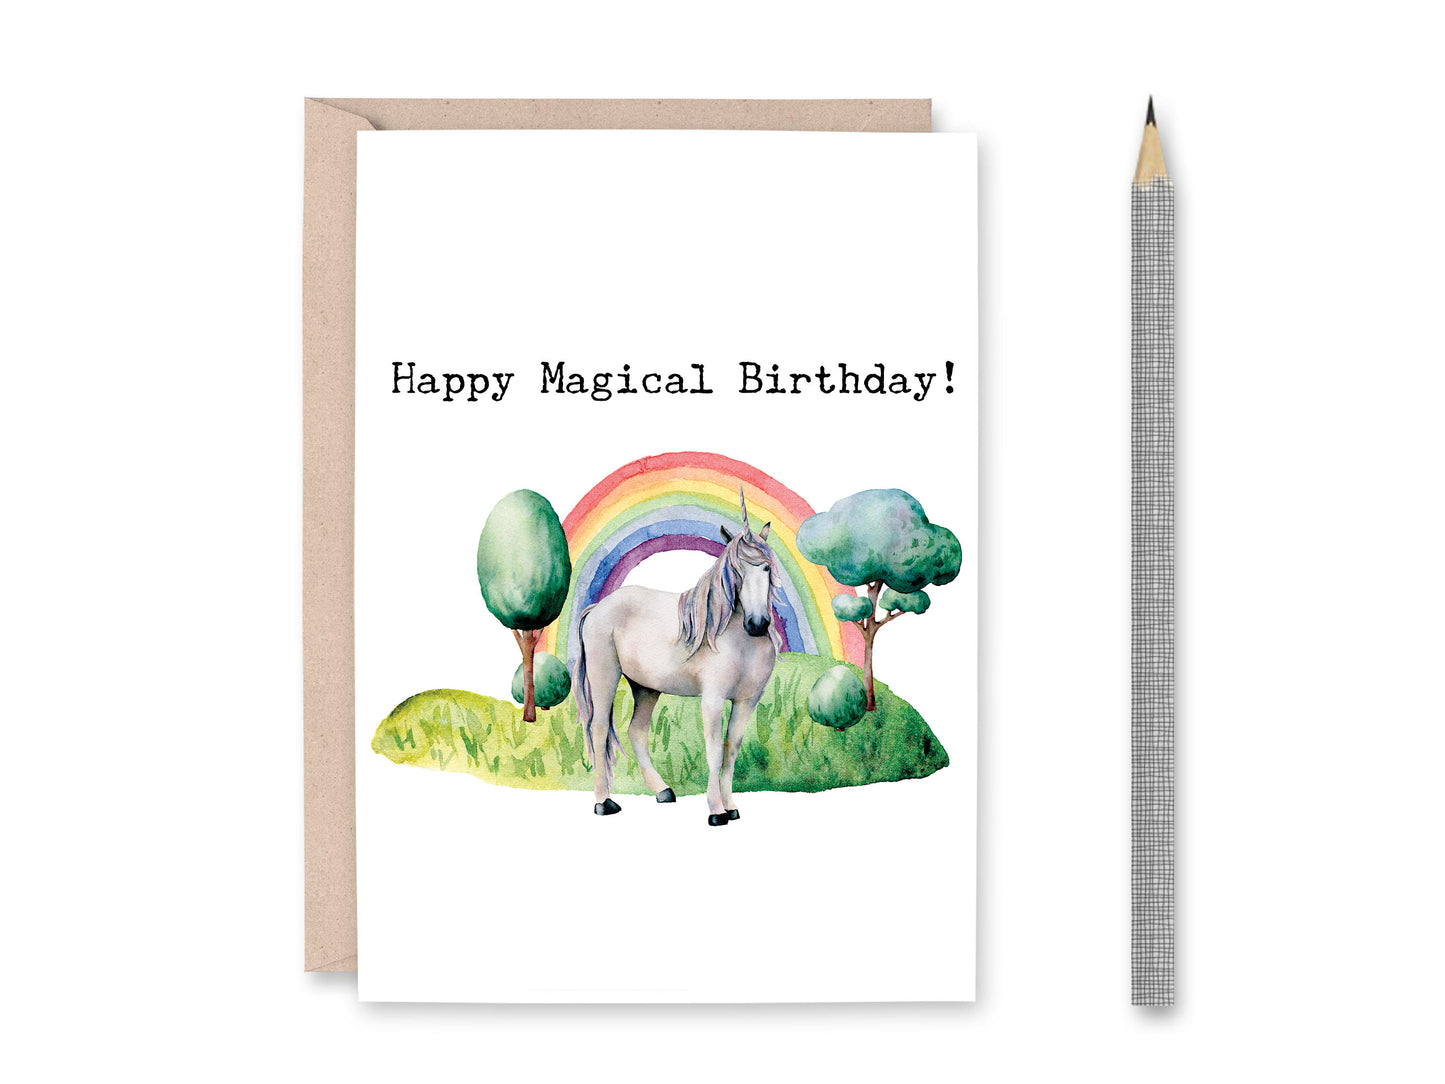 Once upon a Time Personalized Unicorn Birthday Card Printable - Digital Download